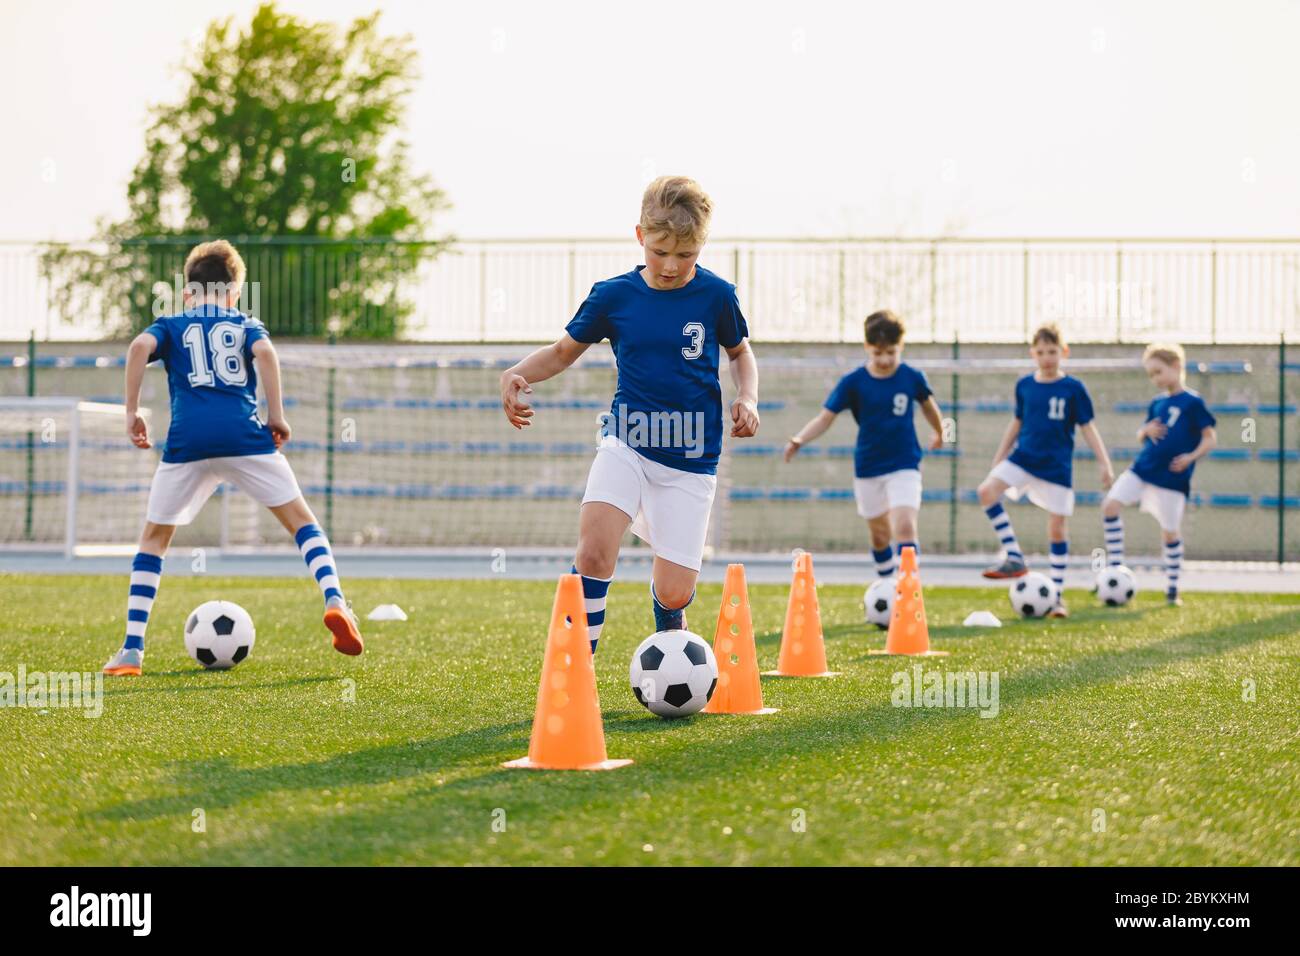 Soccer Training - Warm Up and Slalom Drills. Boys Practicing European Soccer on the Grass School Field Stock Photo